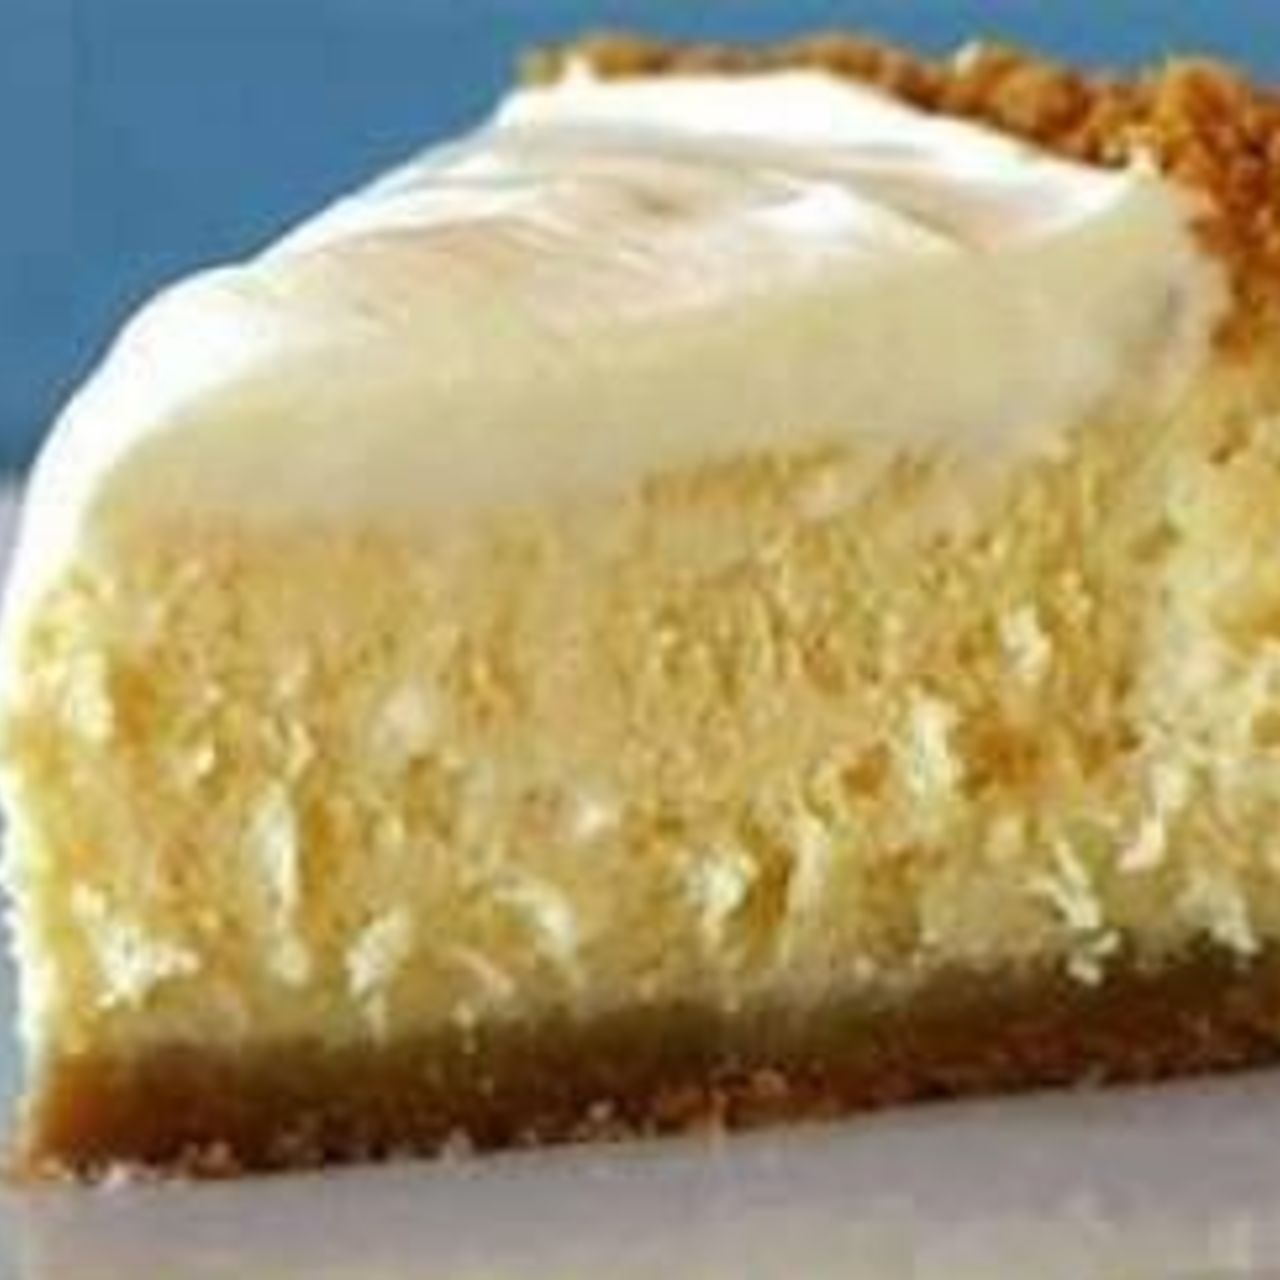 Cotton Sponge Cake with Condensed Milk - 5-ingredients - Spoonful Passion